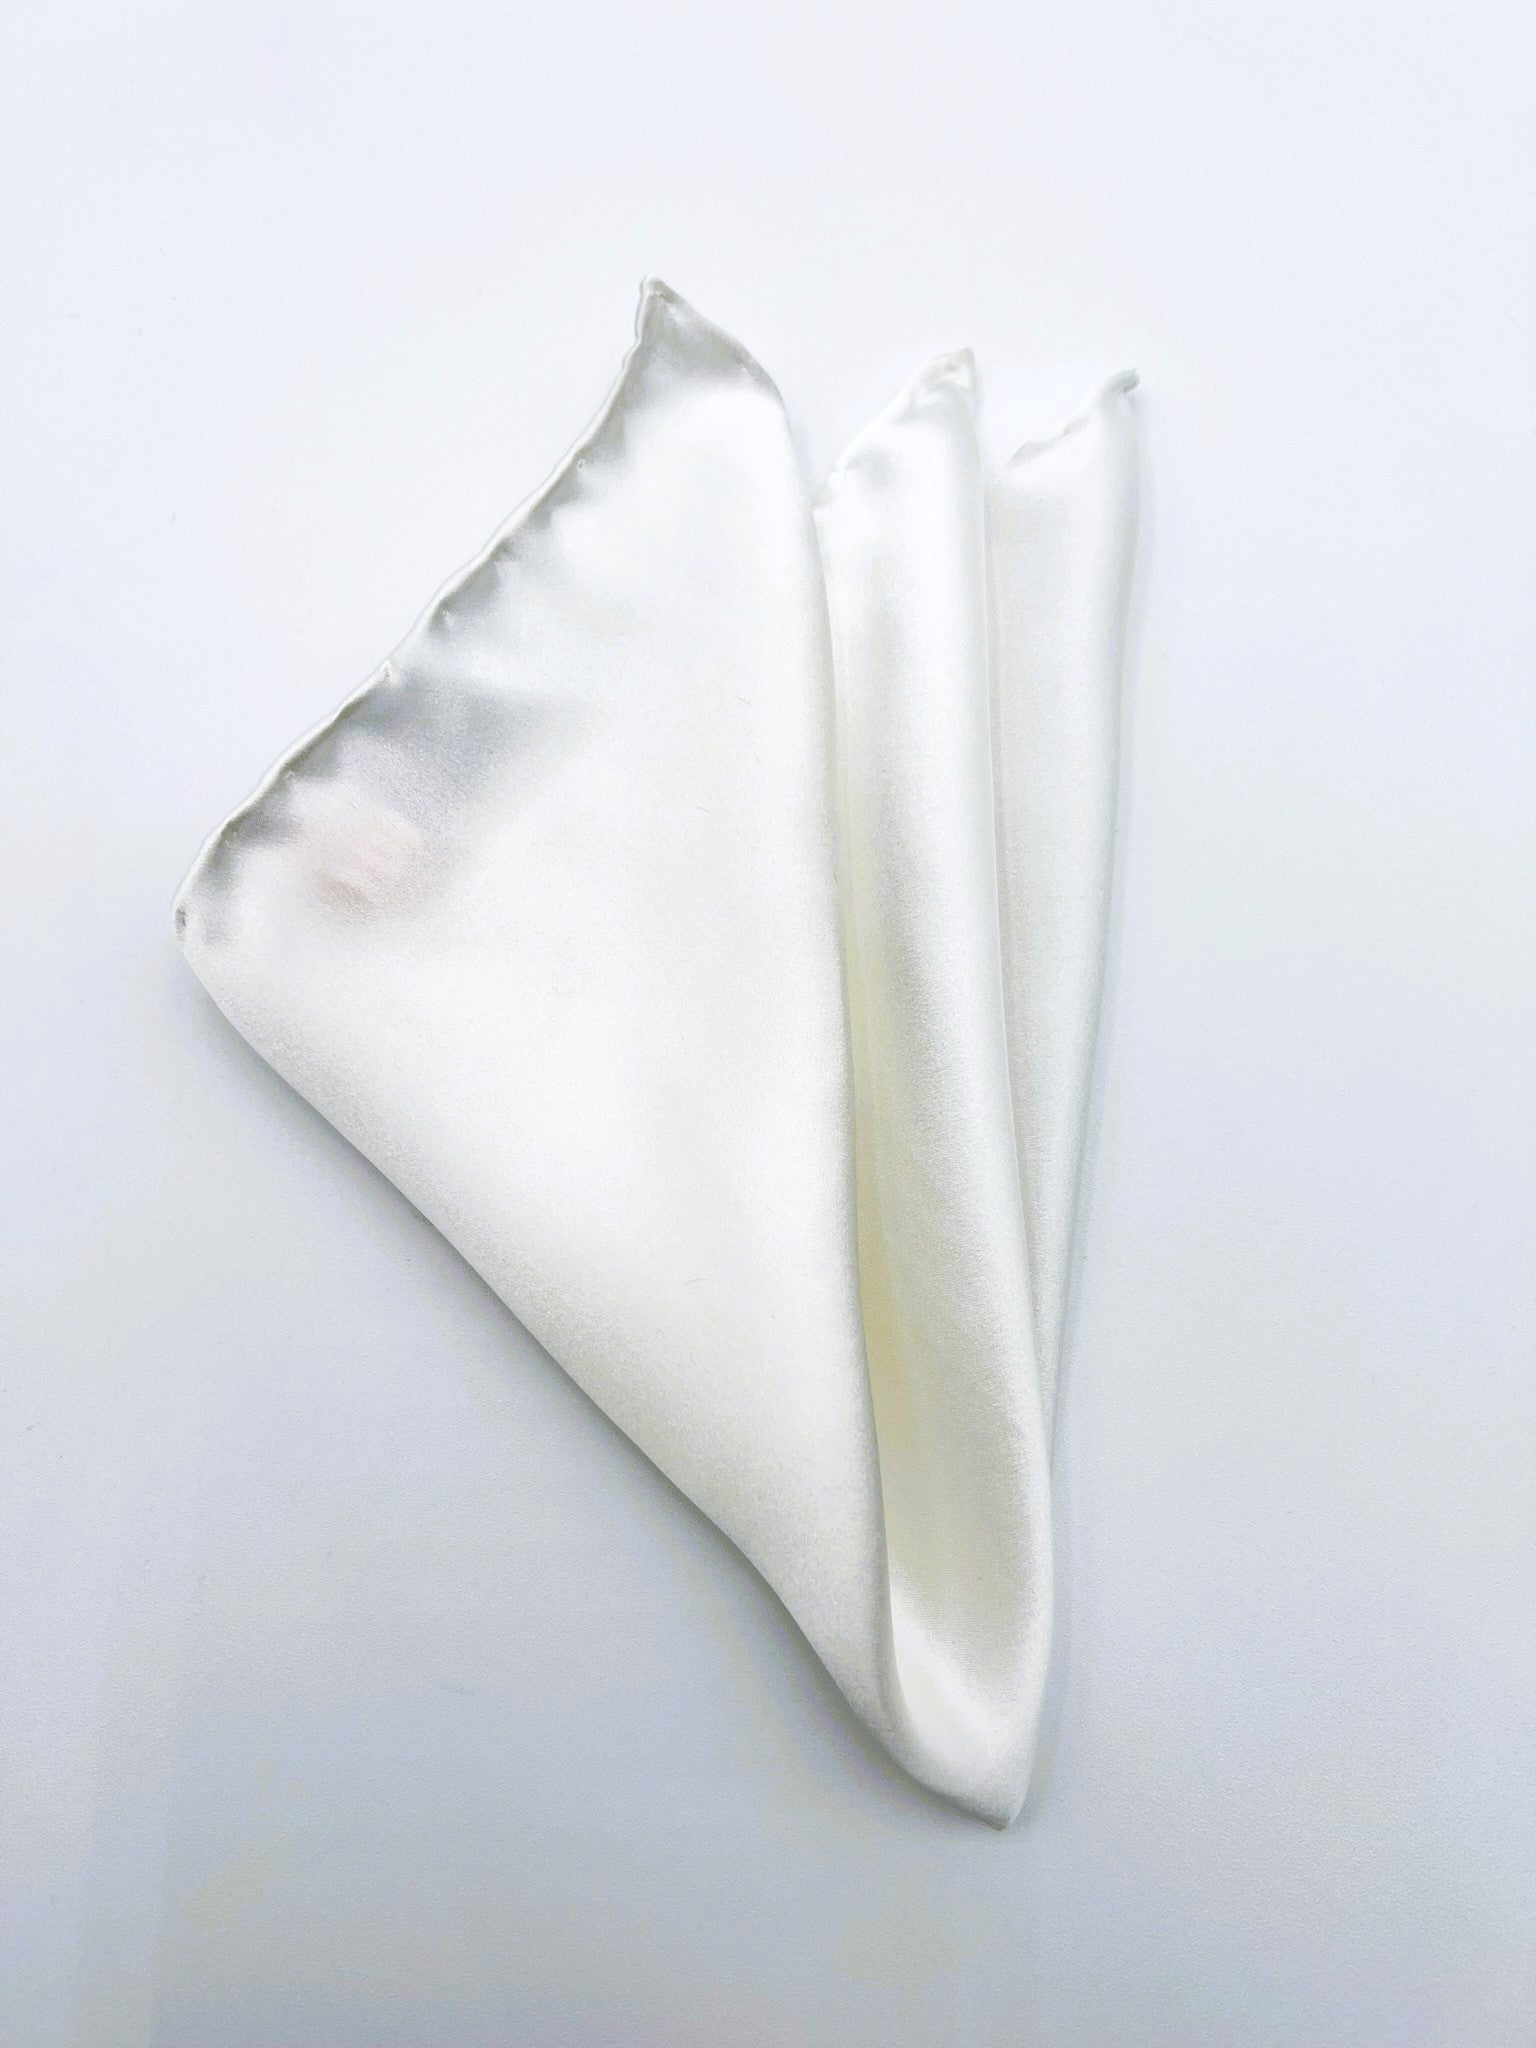 Pearl White Silk Pocket Square. Handmade in Italy. Pocket Square in 100% pure Italian silk,  hand-finished edges. A must-have accessory for every  man's wardrobe that can suit either  a classic or sophisticated look.| Sartoria Dei Duchi - Atri